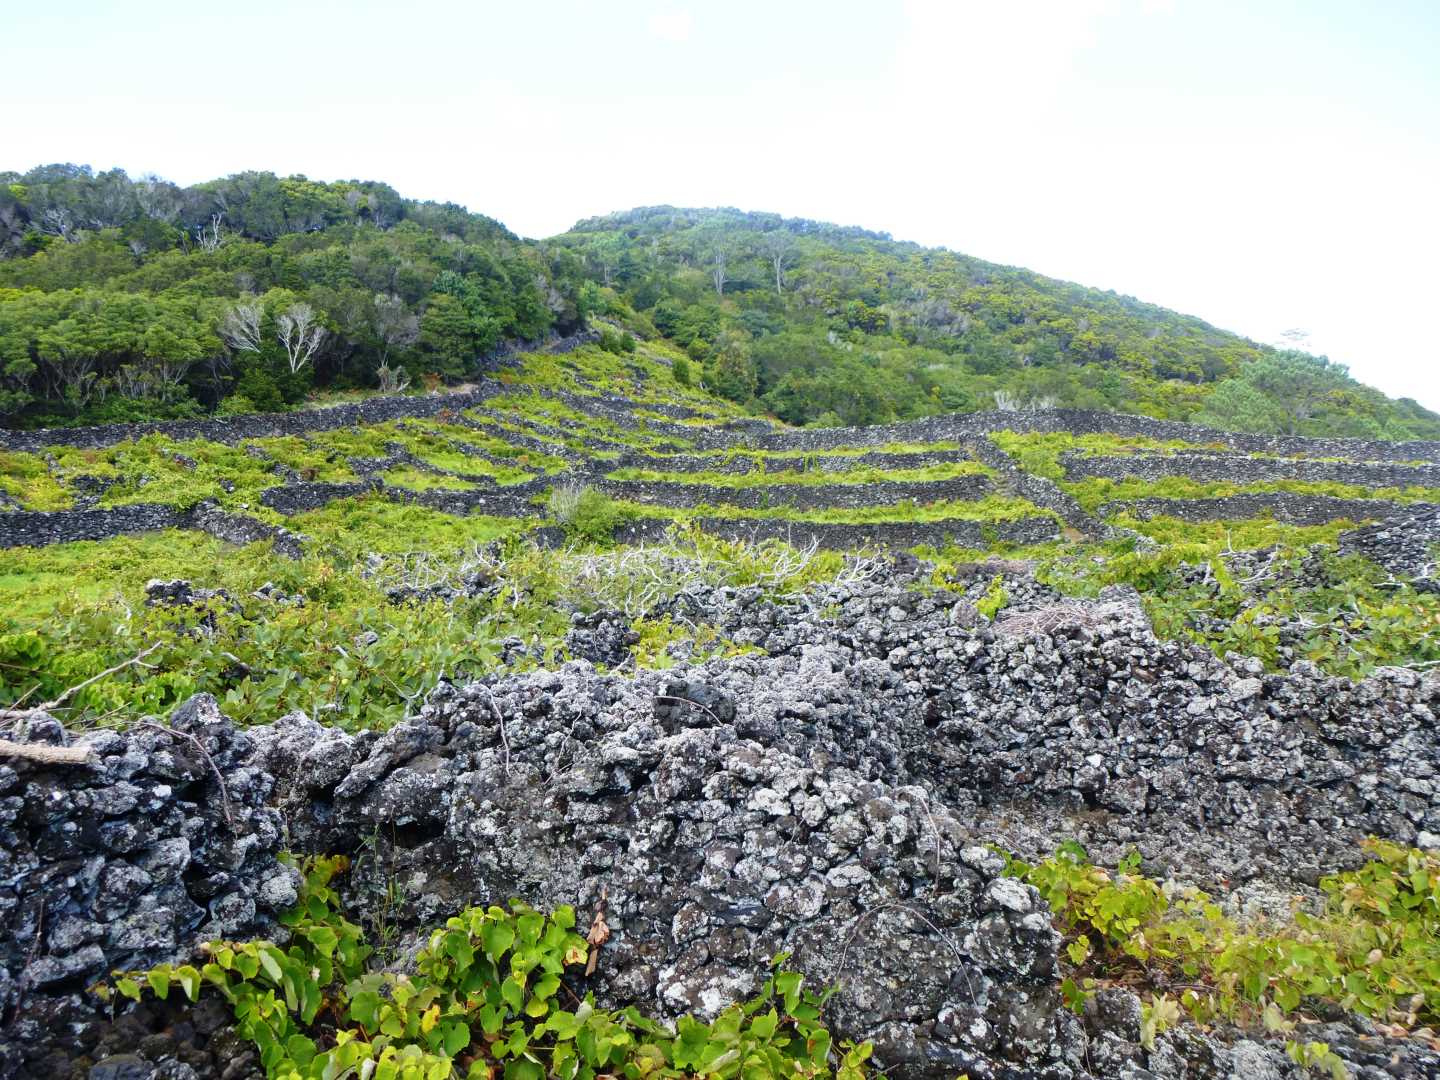 Image of the UNESCO protected grape fields